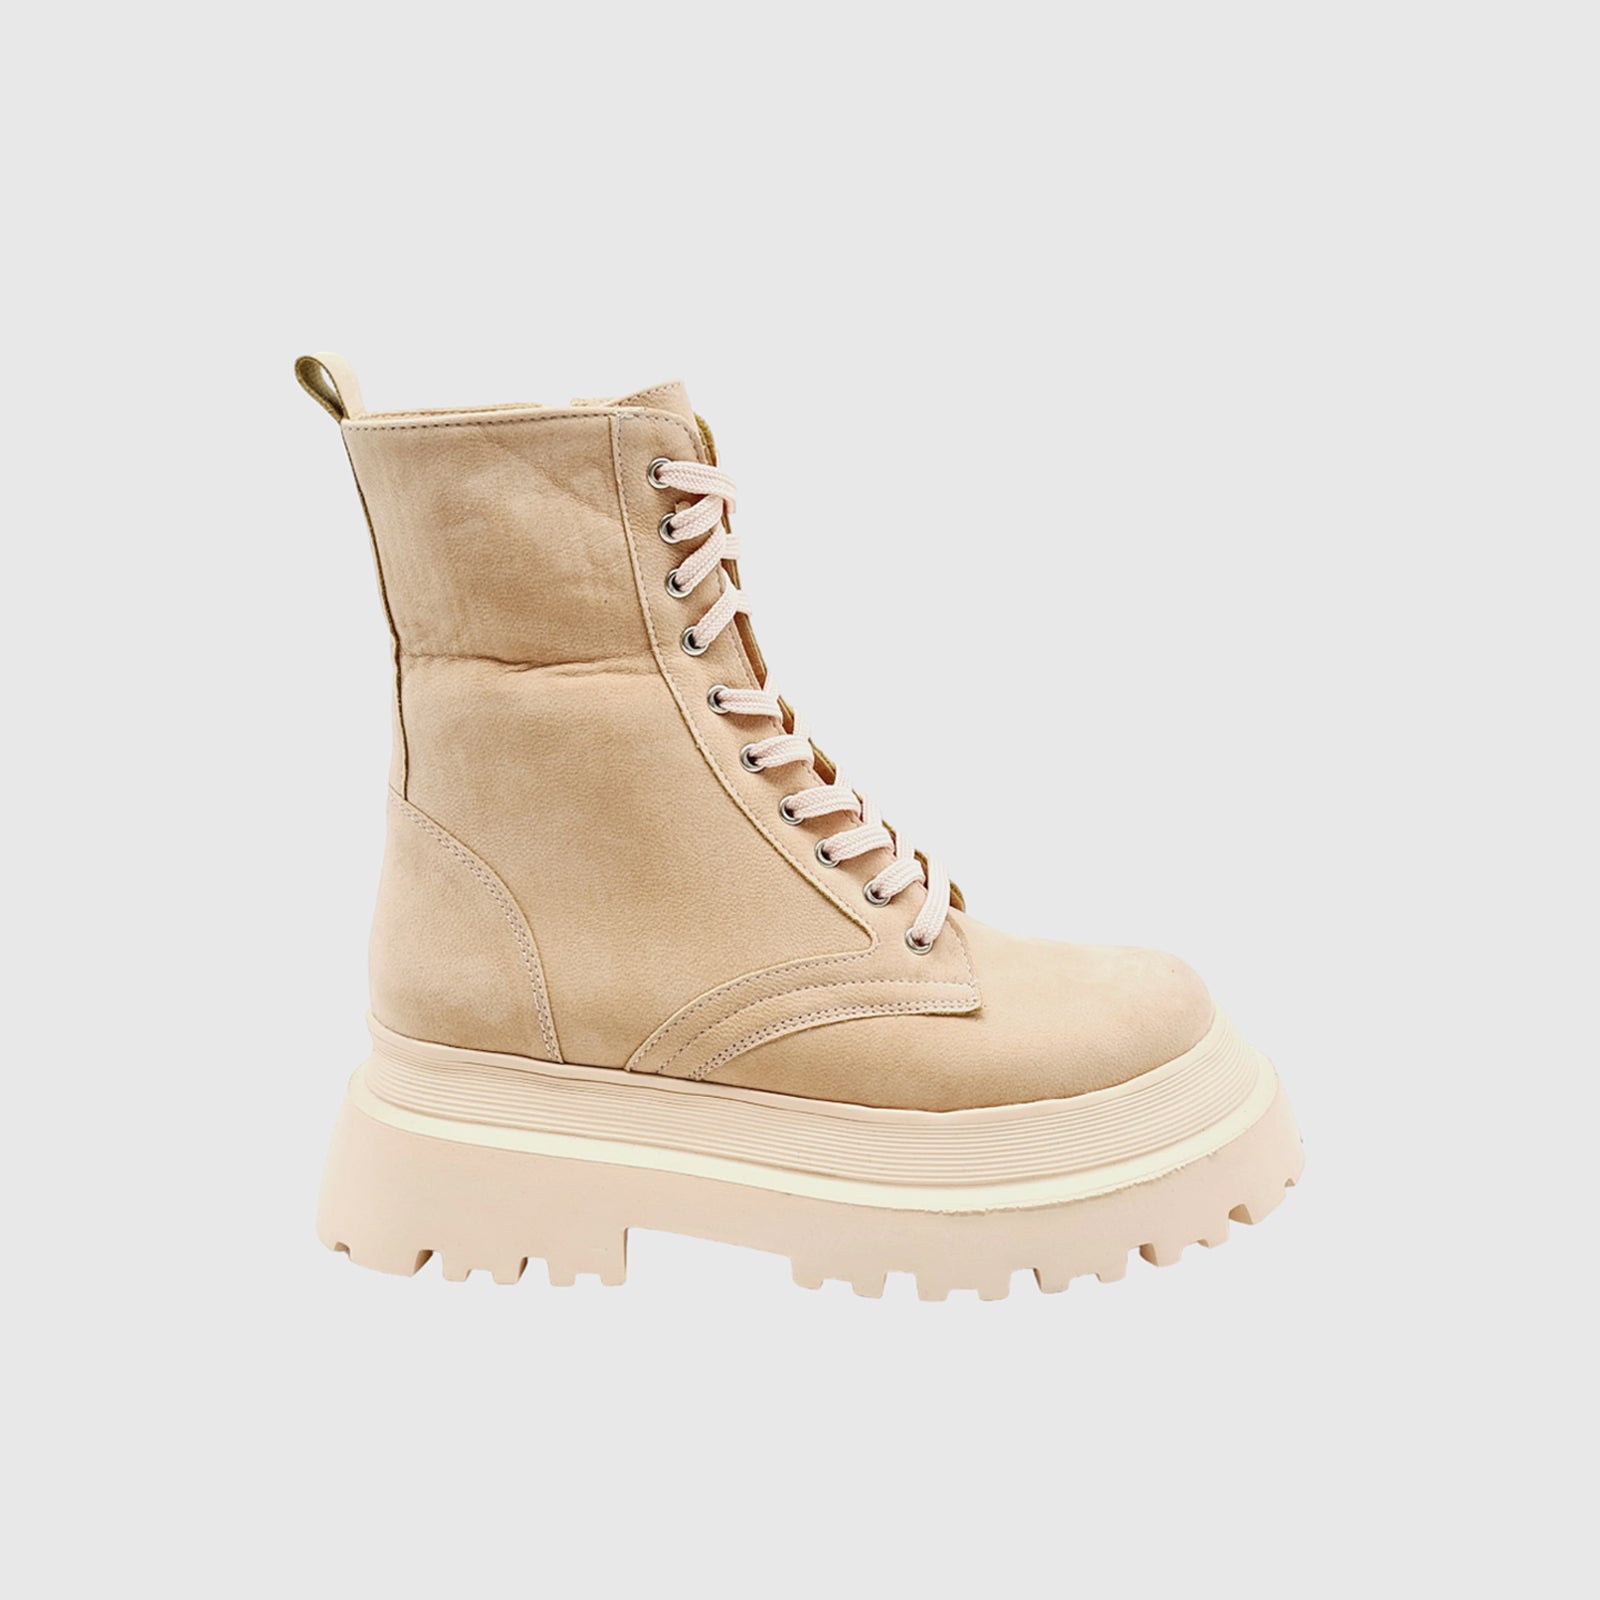 MN CANDY 6 POWDER SUEDE Boots | familyshoecentre